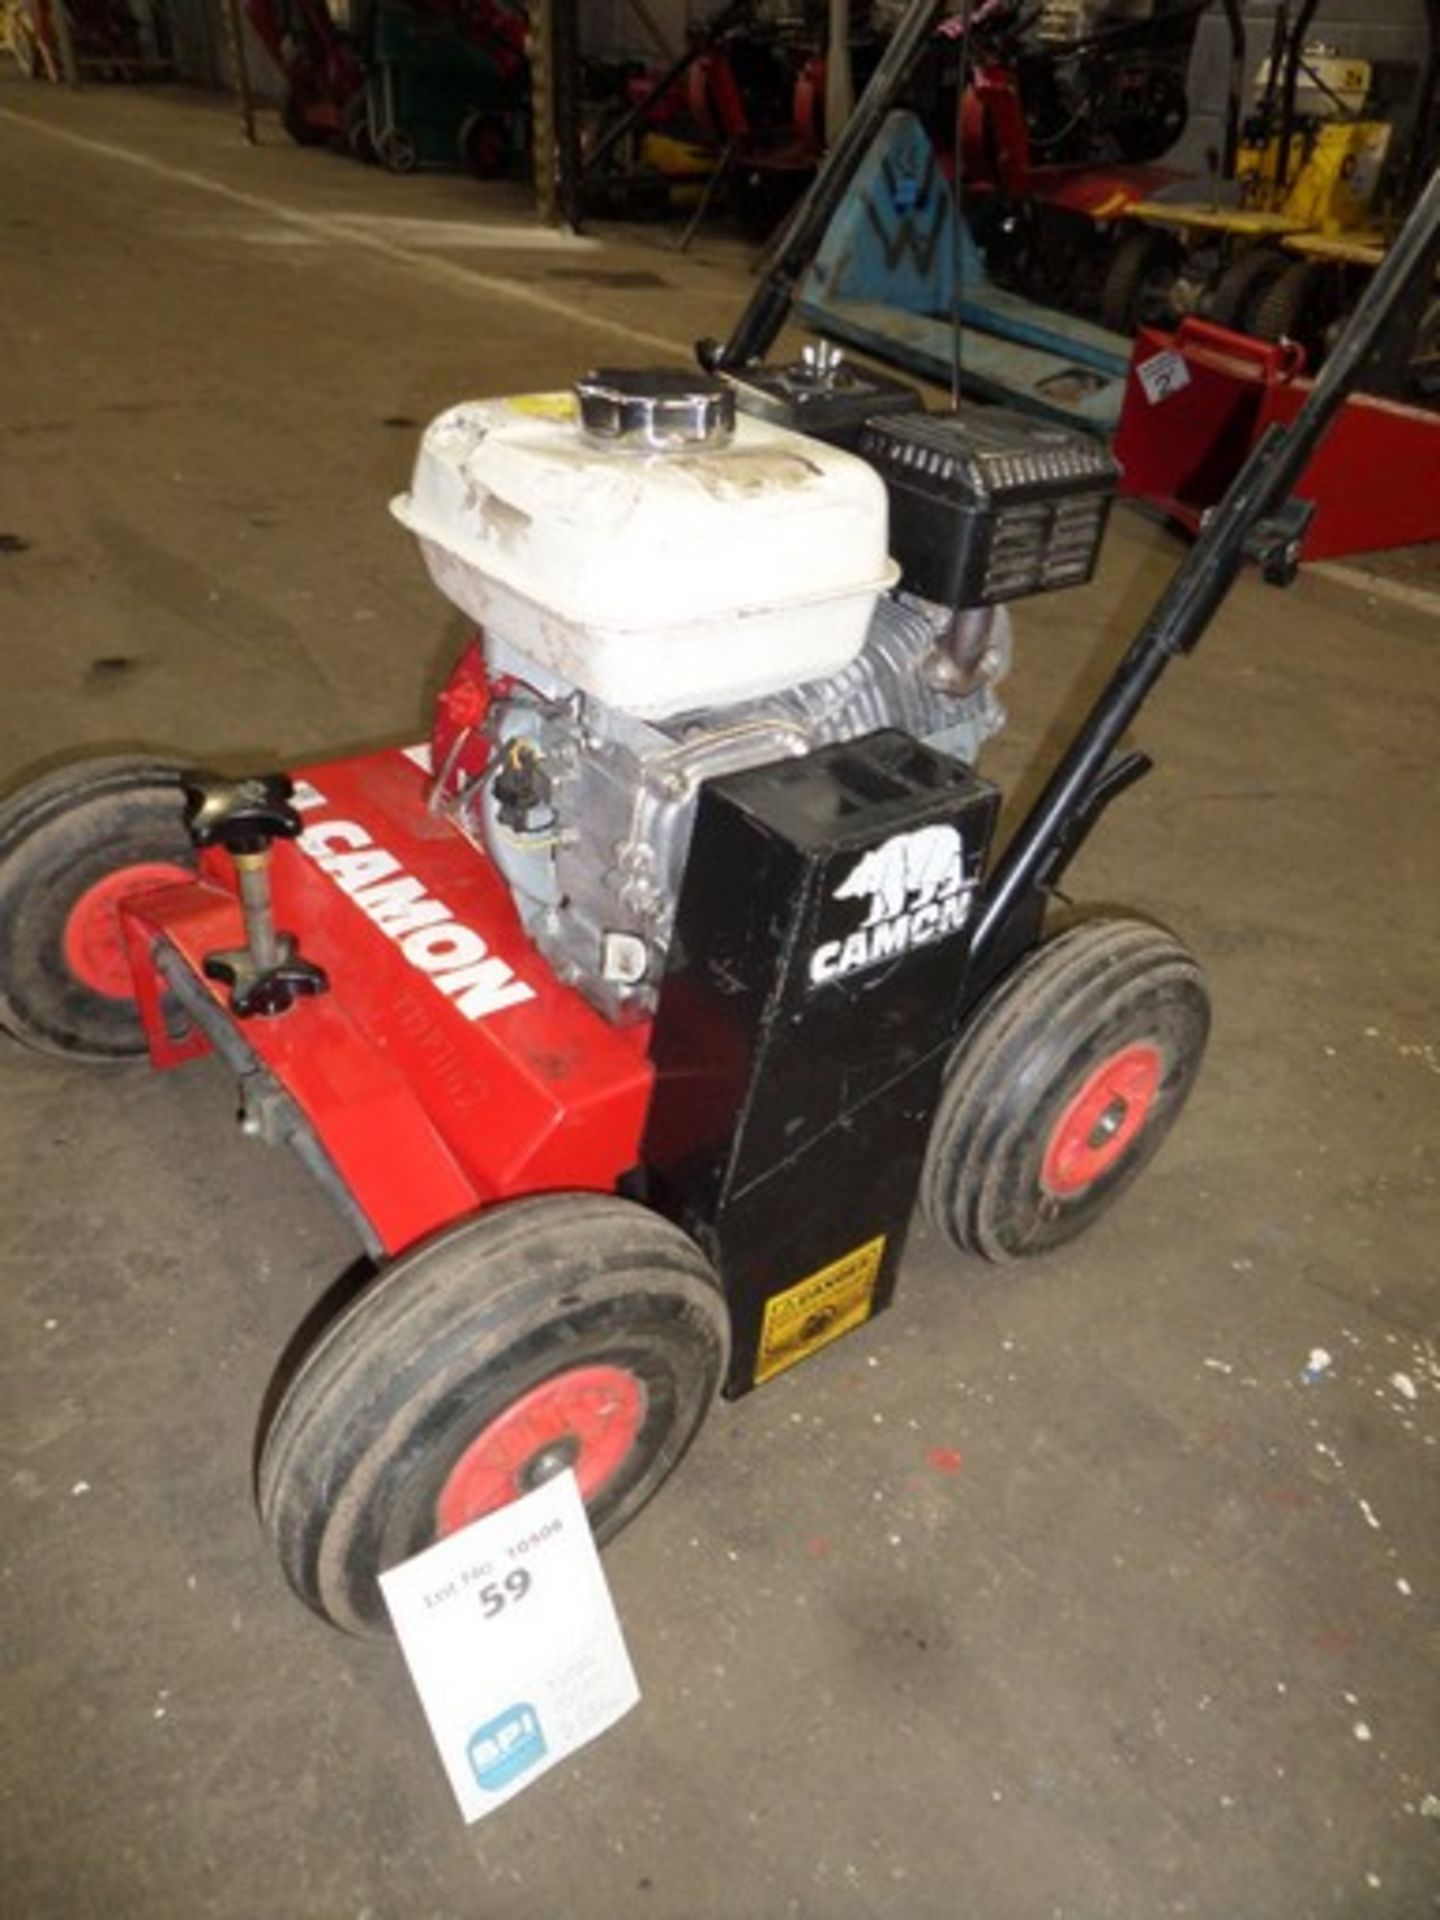 CAMON  {014986} Petrol Lawn Scarifier Petrol powered by Honda GX160 engine and is working fine but